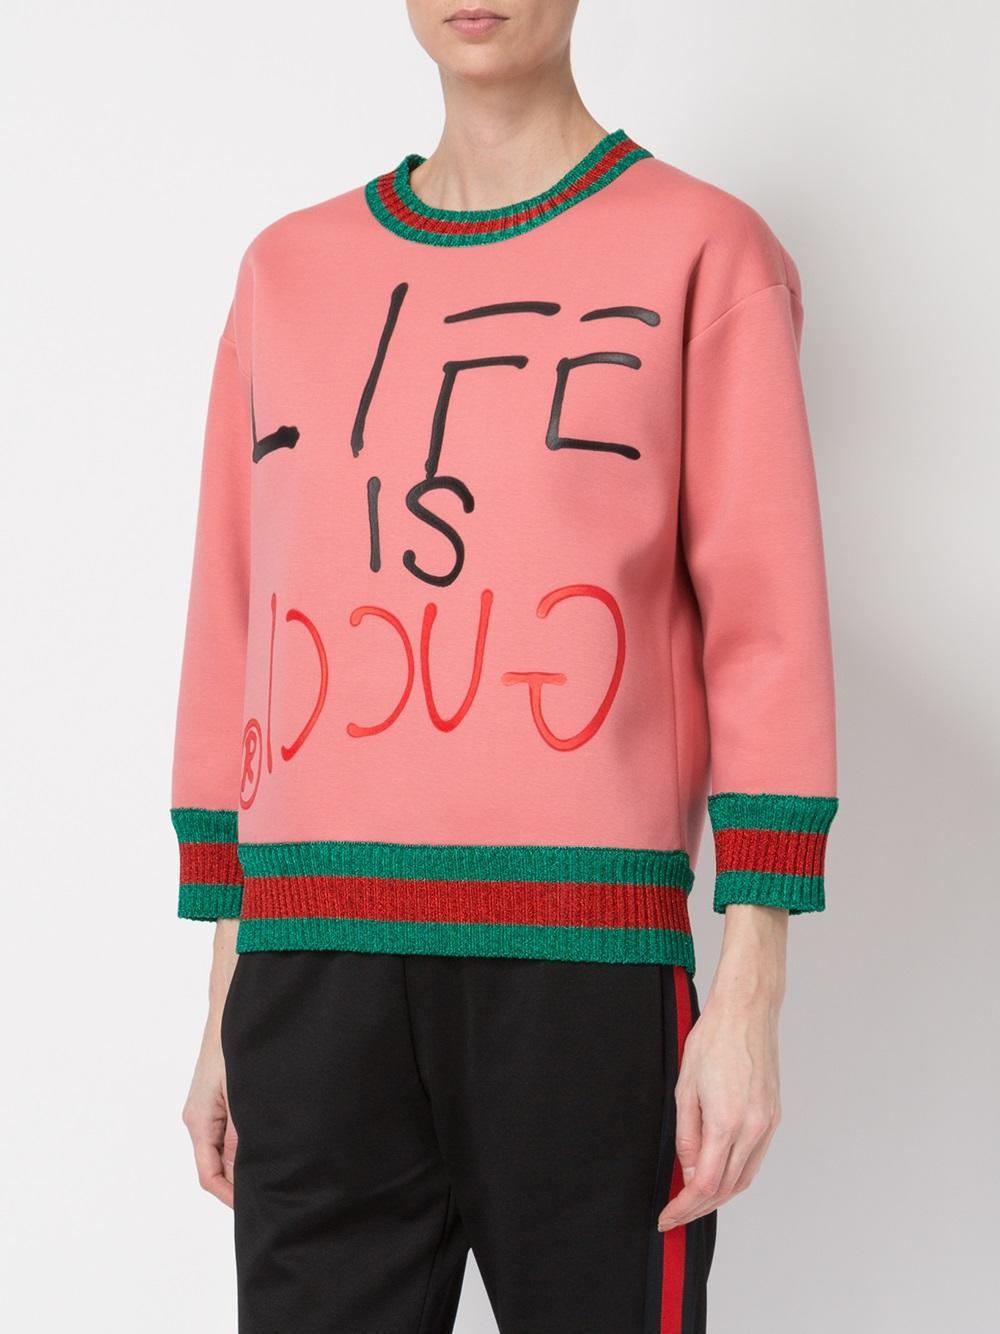 Gucci Cotton Life Is Sweatshirt in Pink/Purple (Pink) - Lyst